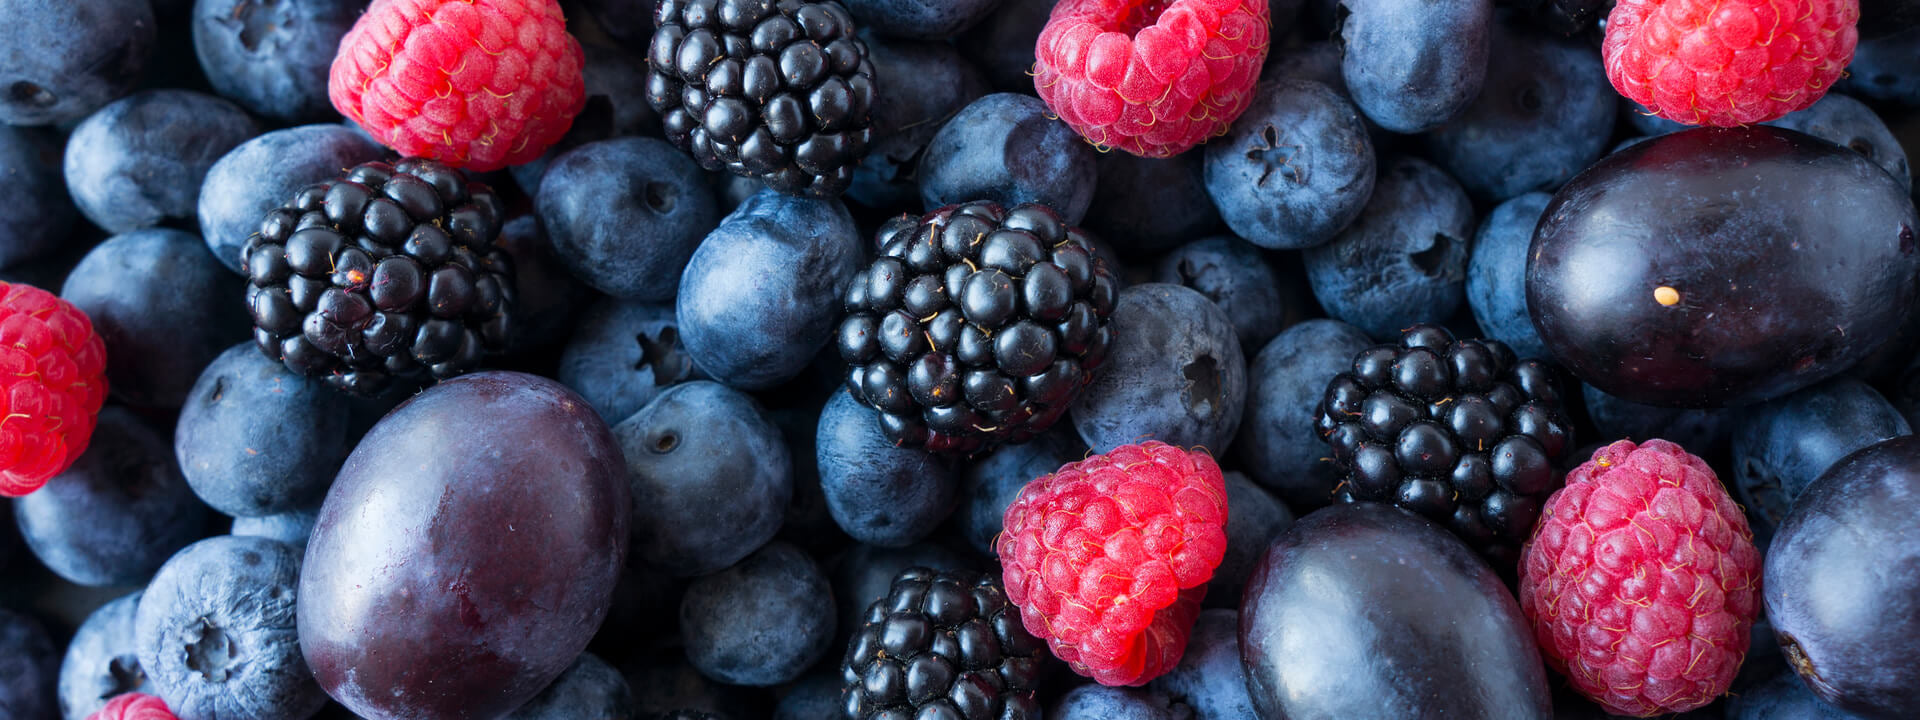 More evidence that eating berries is good for you